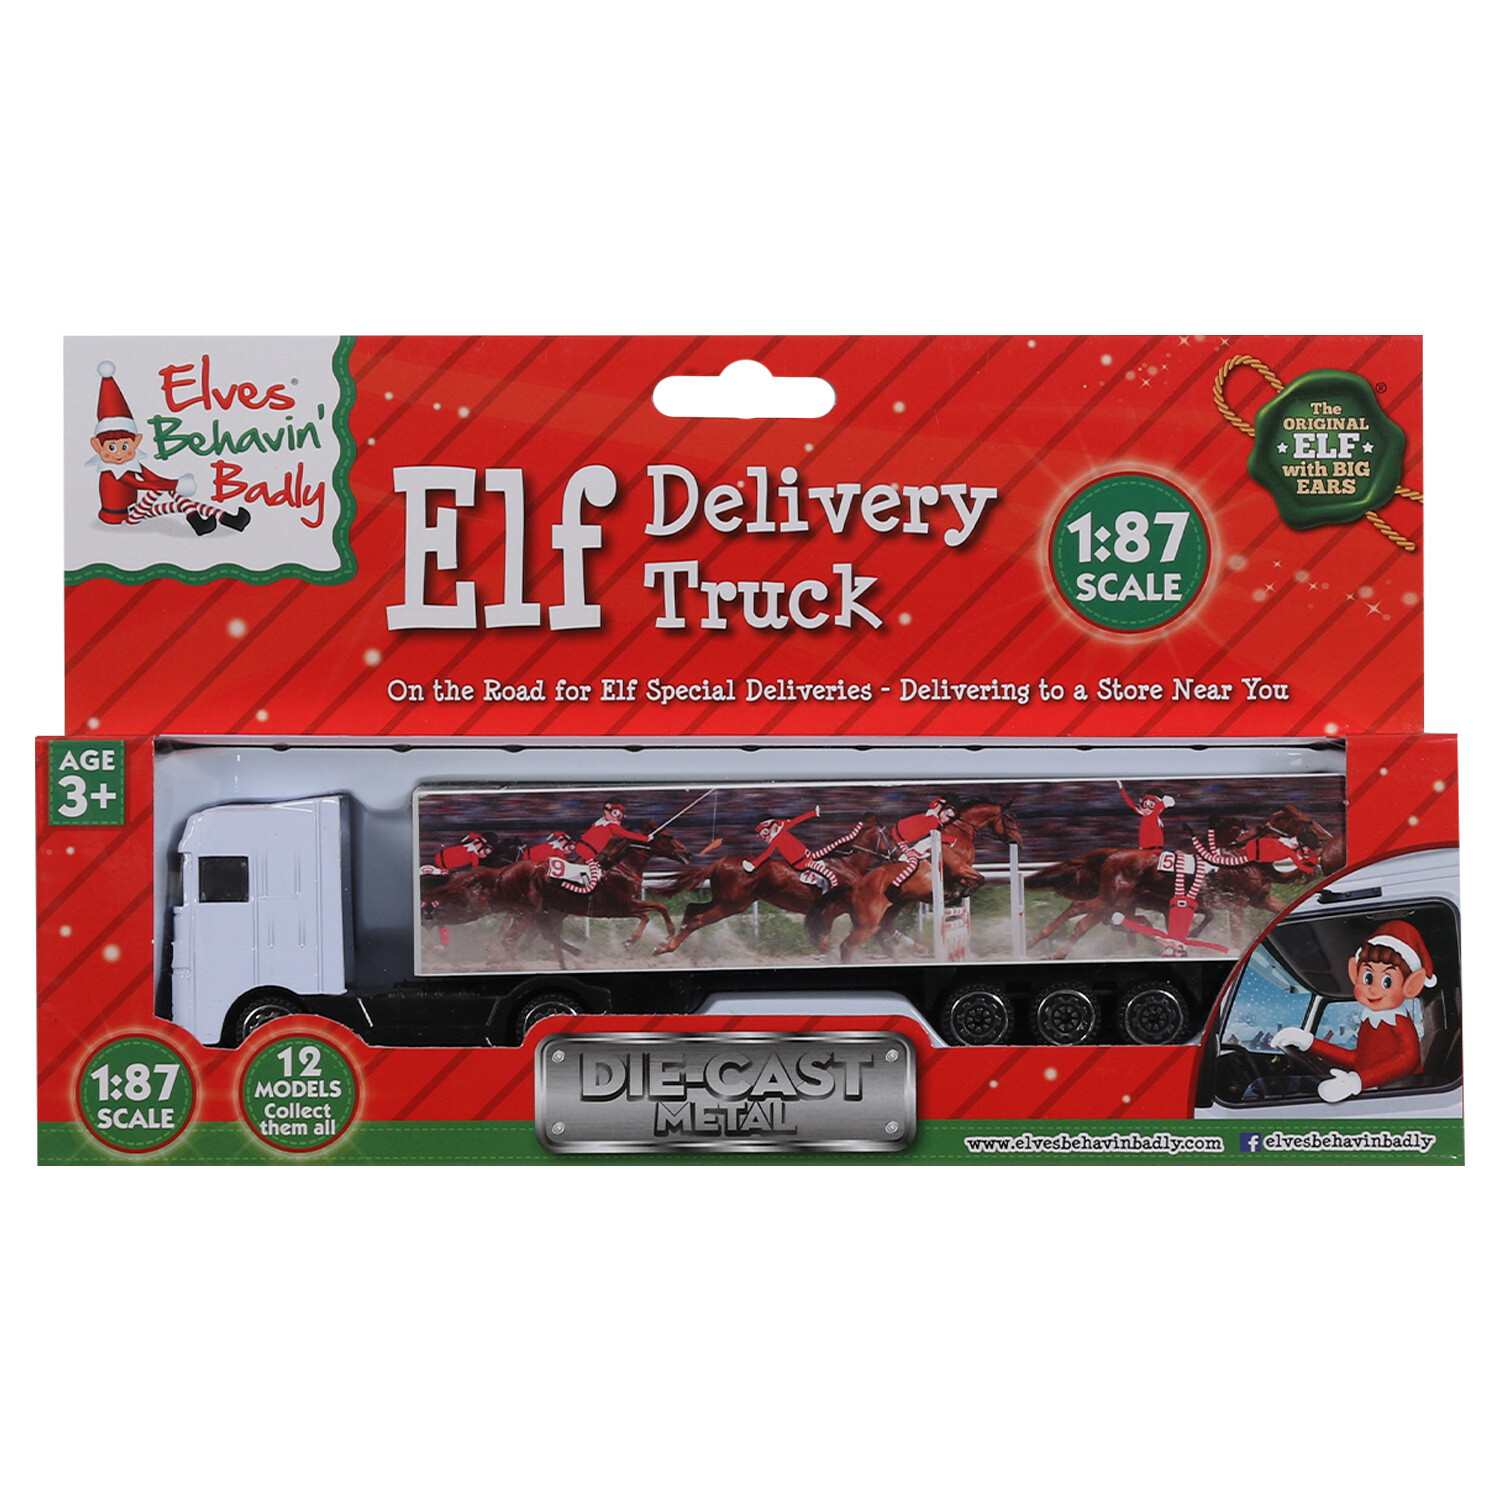 Elf Delivery Truck Image 2